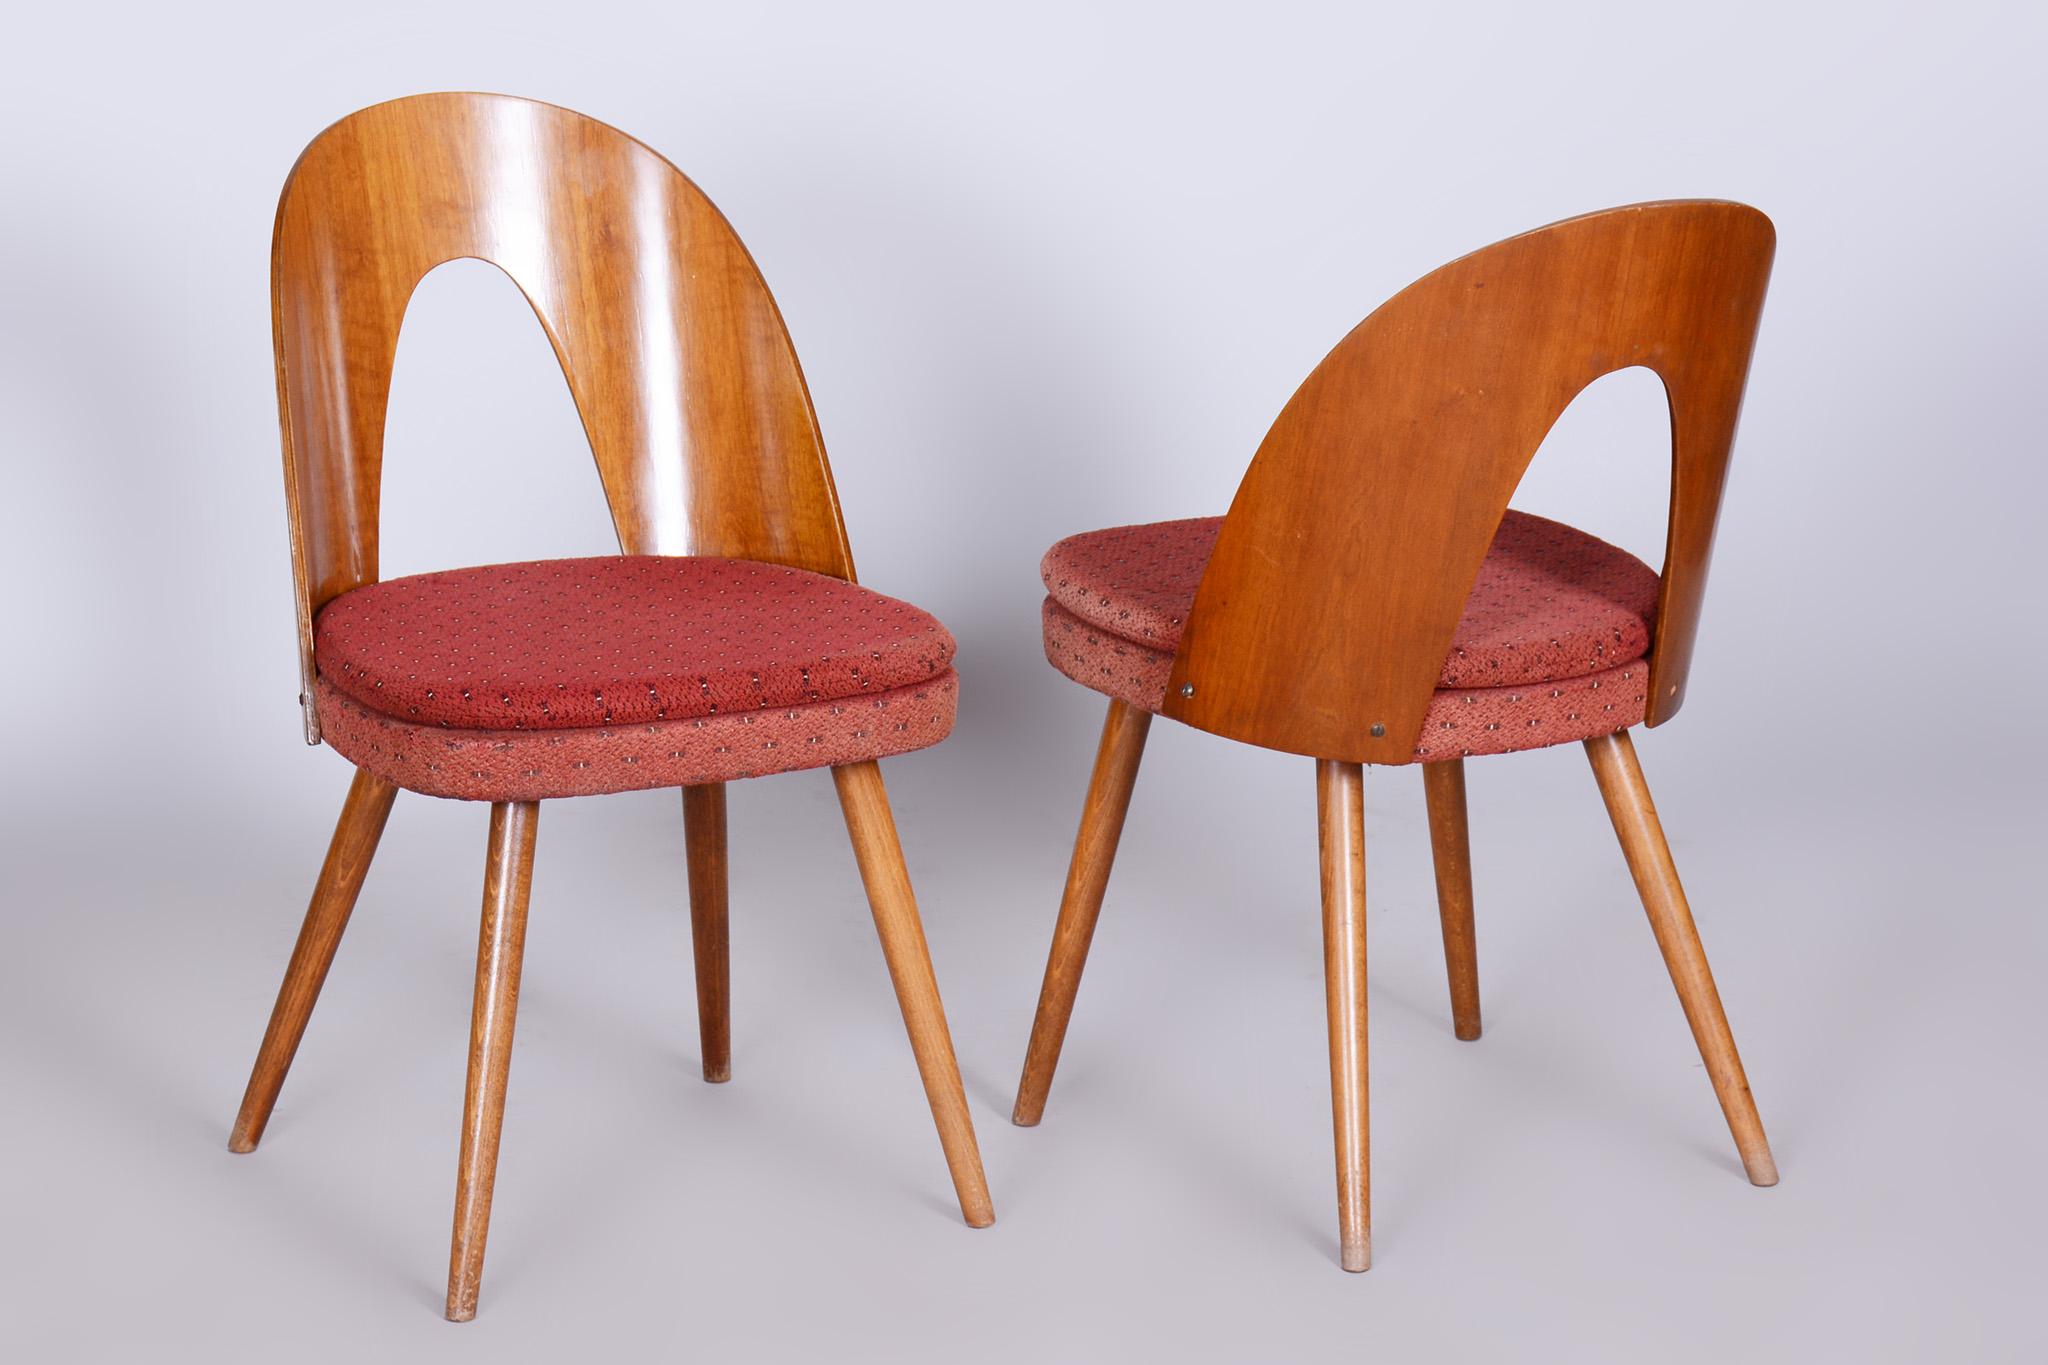 Fabric Pair of Mid-Century Chairs Designed by Antonin Suman, 1950s, Czechia For Sale